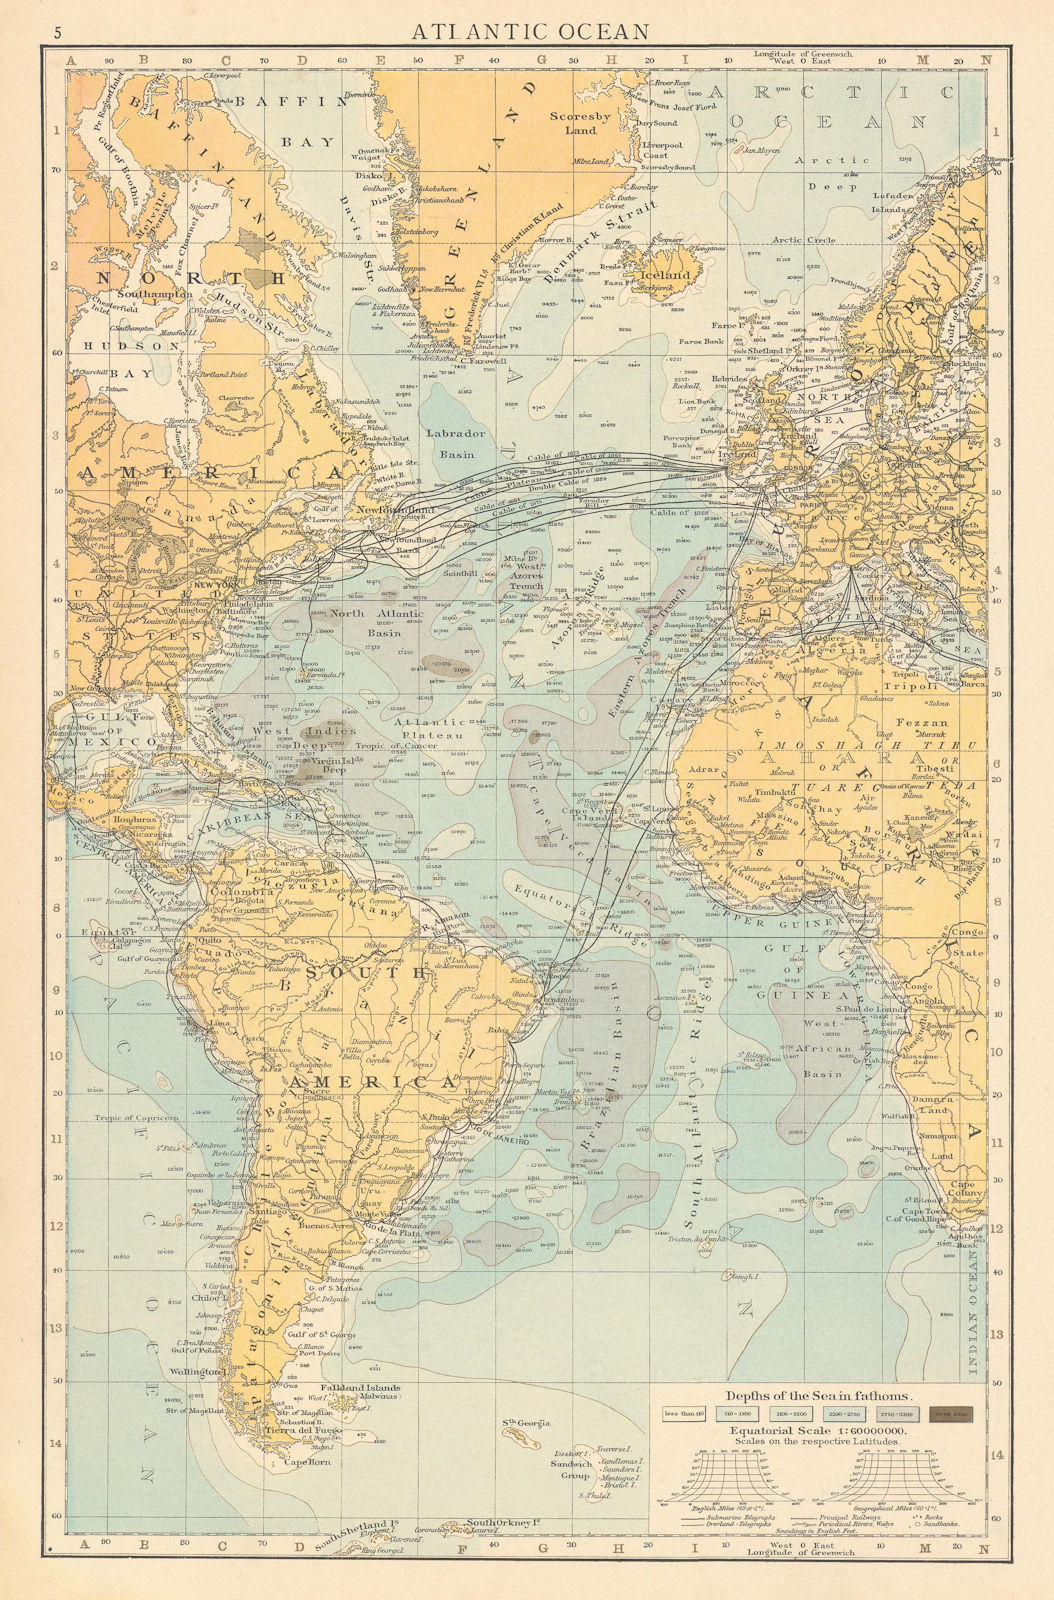 Atlantic Ocean showing depths & telegraph cables. THE TIMES 1895 old map